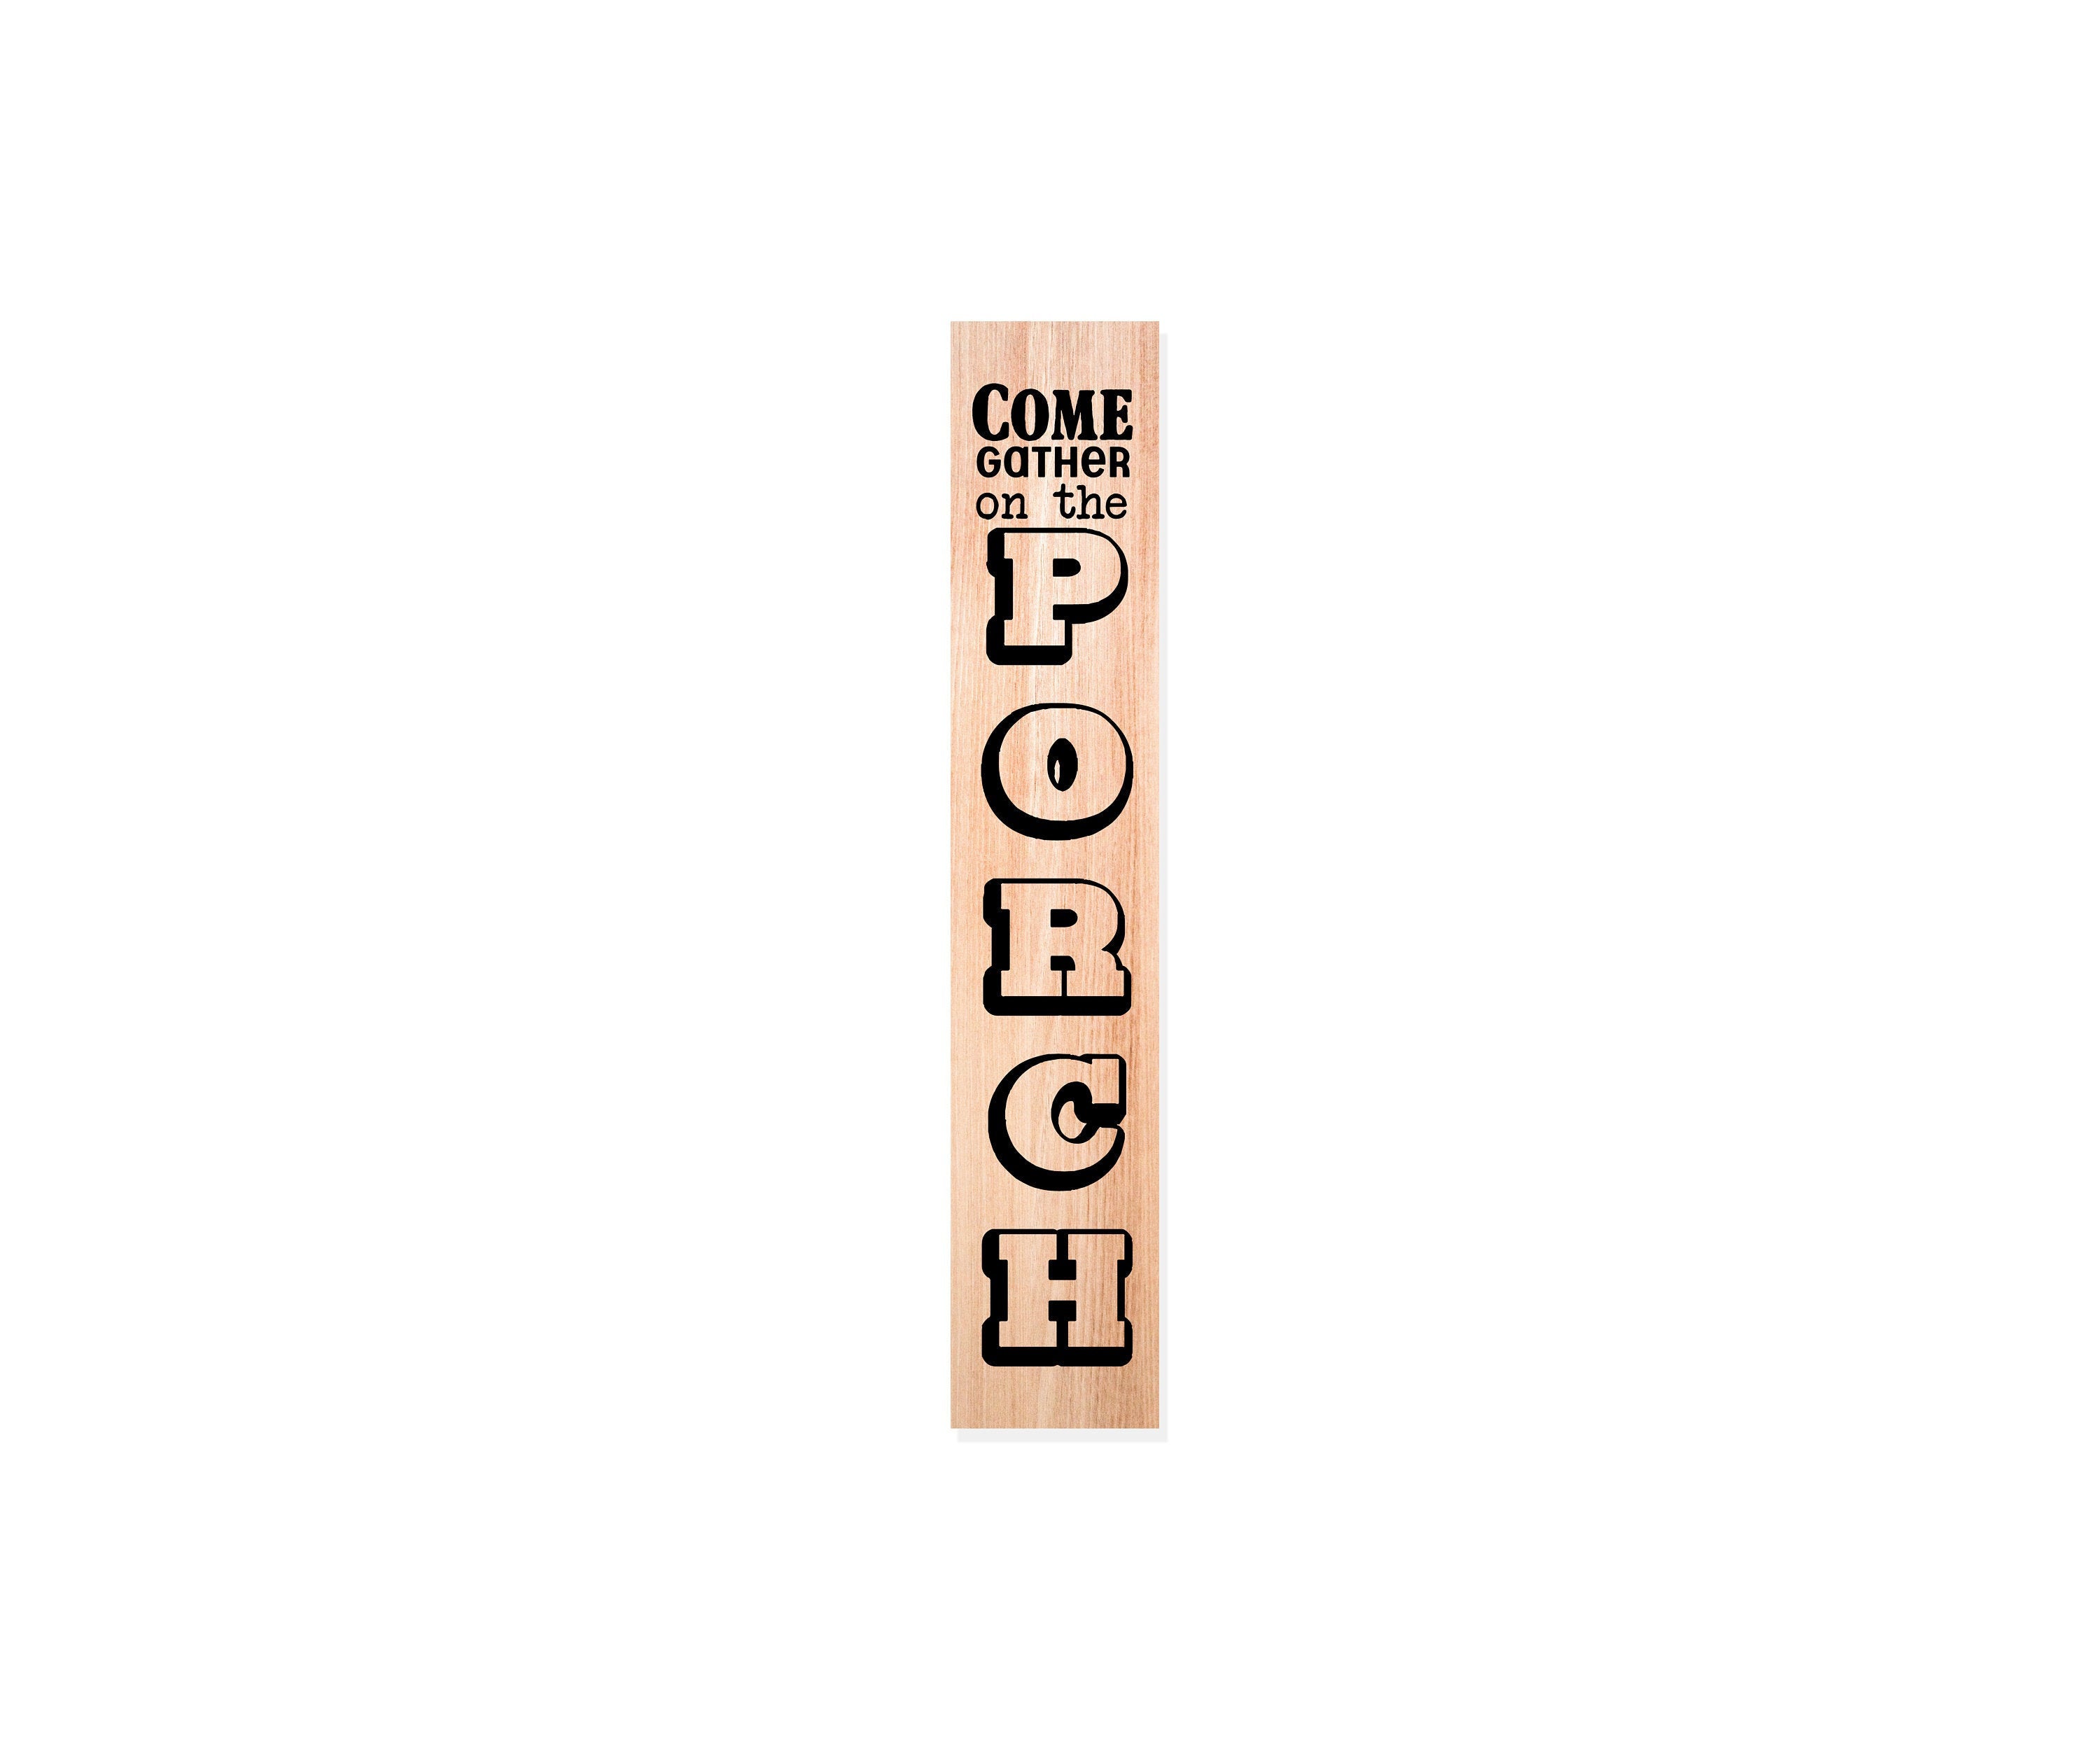 Come Gather on the Porch Wood Sign with Vinyl Decal - Outdoor and Indoor Everyday, Seasonal Spring, Summer, Winter, Fall Decor for Homes